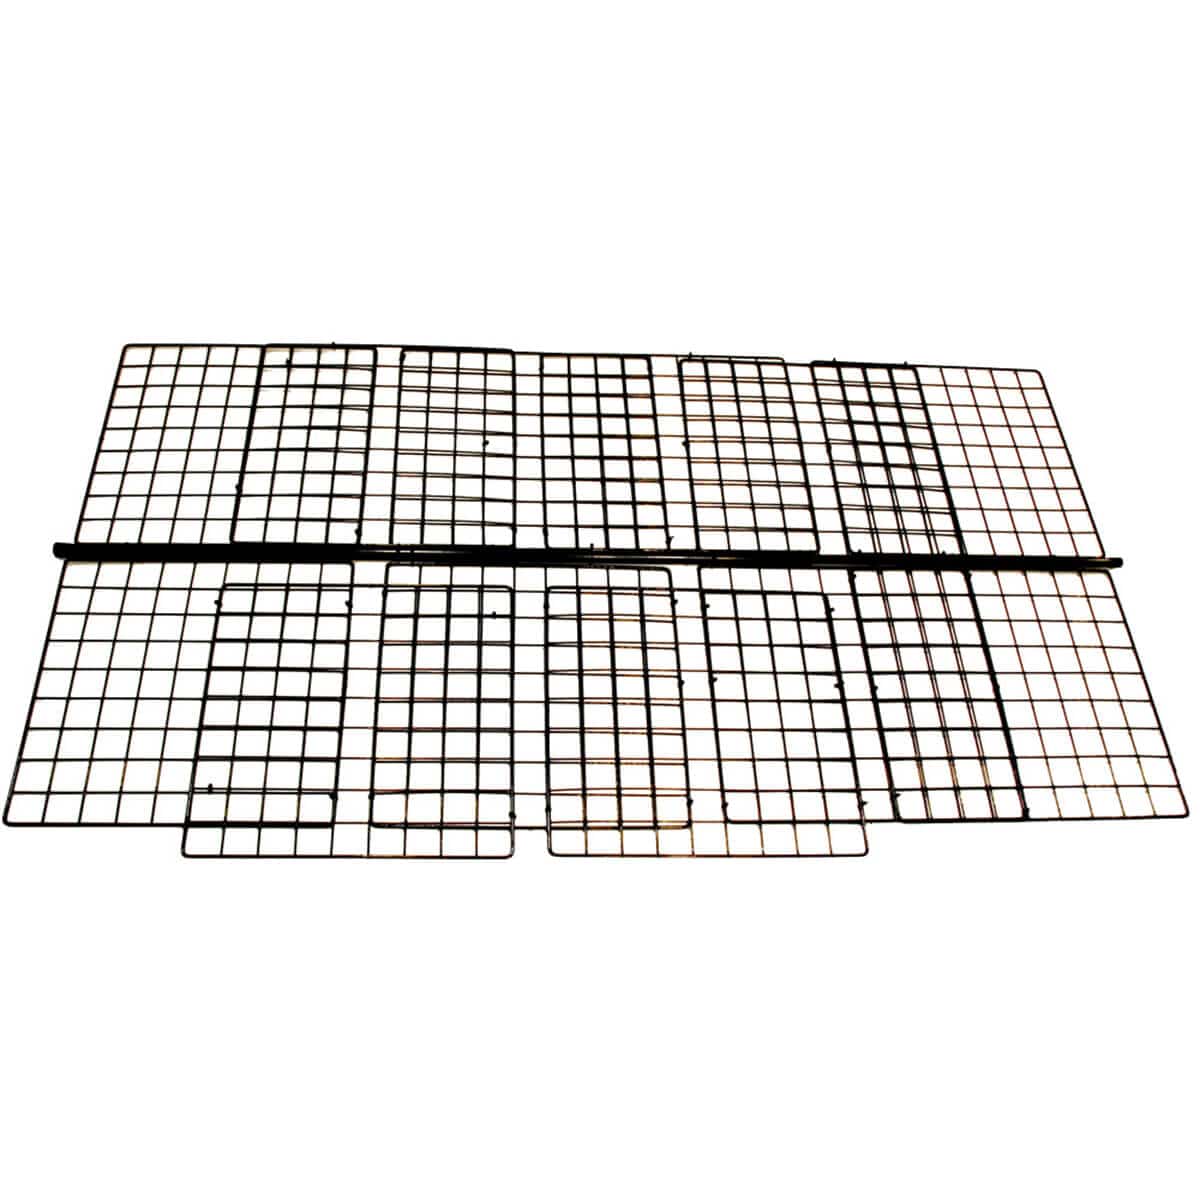 Black grids and rods comprising a medium cover for a C&C guinea pig cage